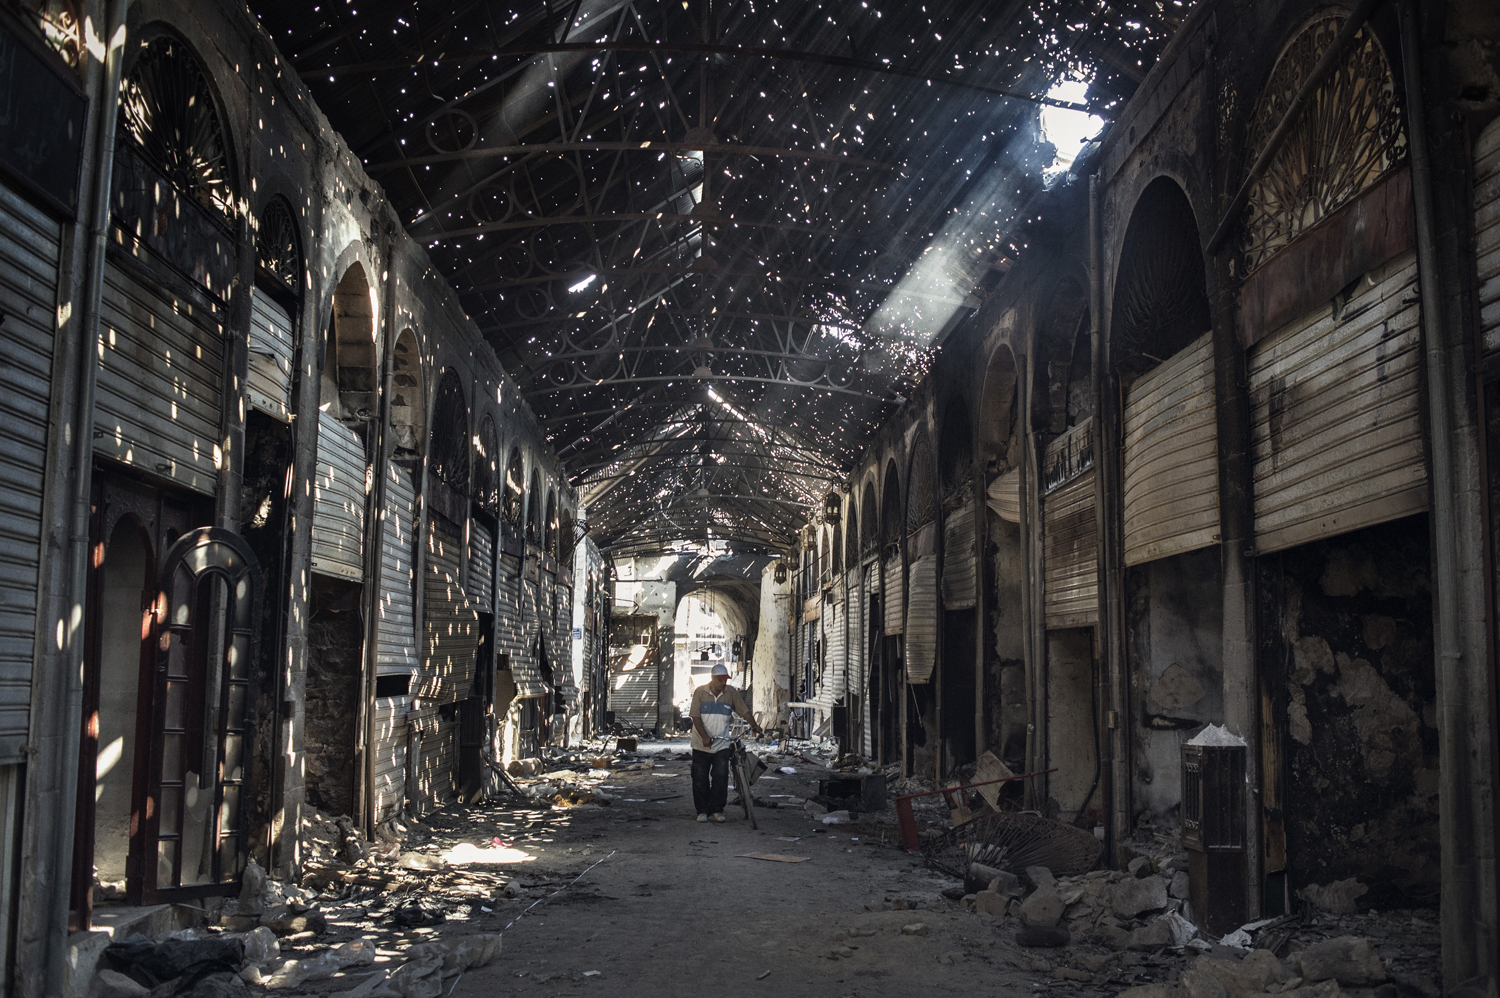 The old covered market, Homs. May 14, 2014.